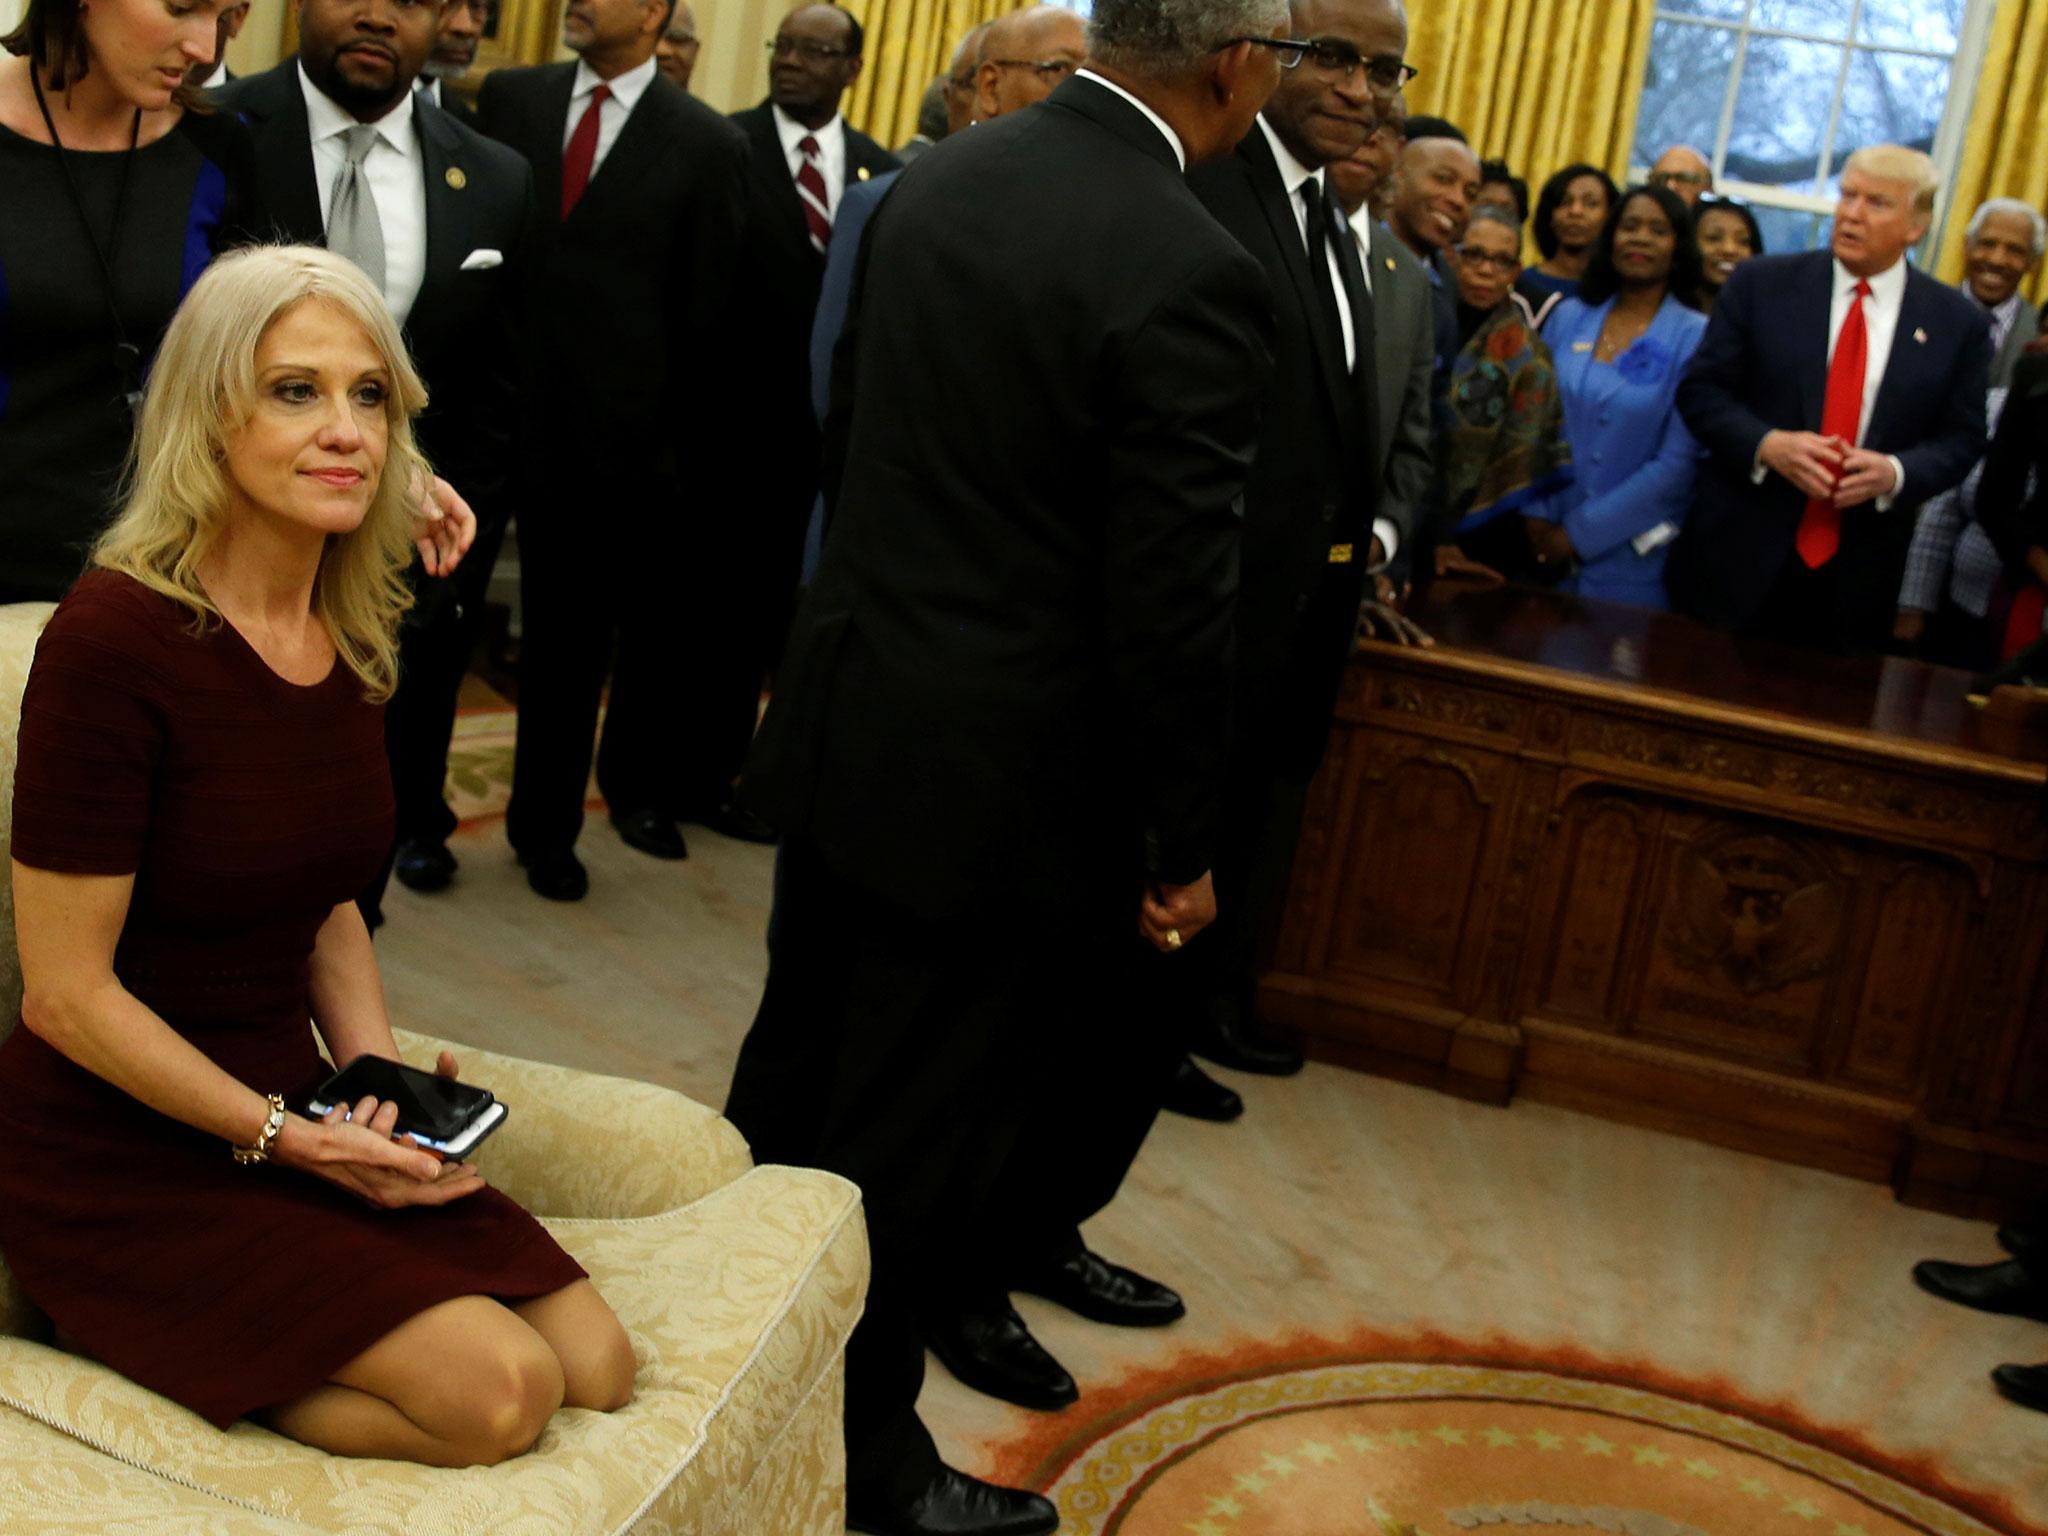 Kellyanne Conway also referred to a fictional terrorist attack and plugged Ivanka Trump's clothing since the inauguration